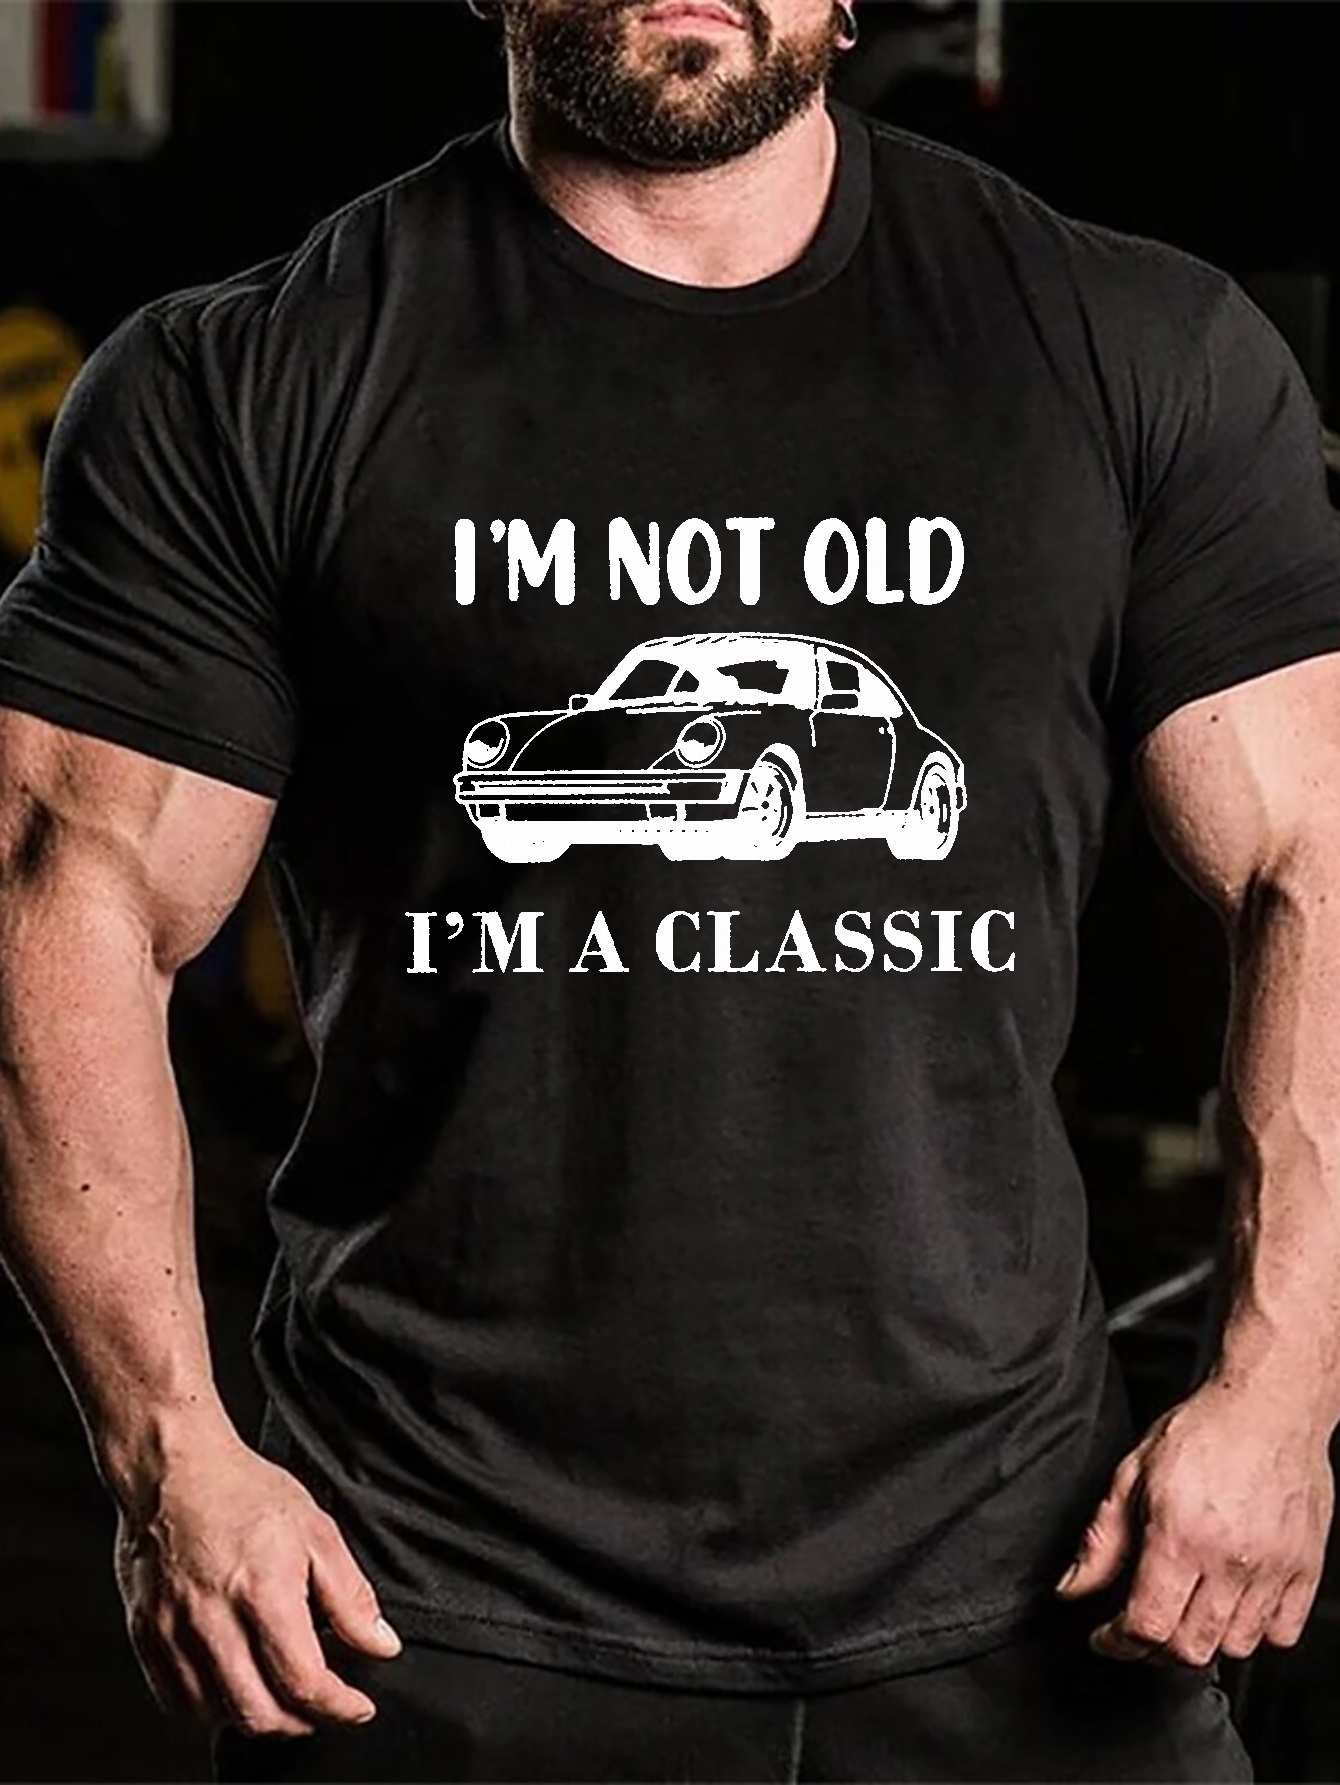 Cool Card Print T Shirt, T-shirts for Men, Summer I'm Not Old I'm Classic Graphic Tees for Males, Plus Size,Khaki,Temu